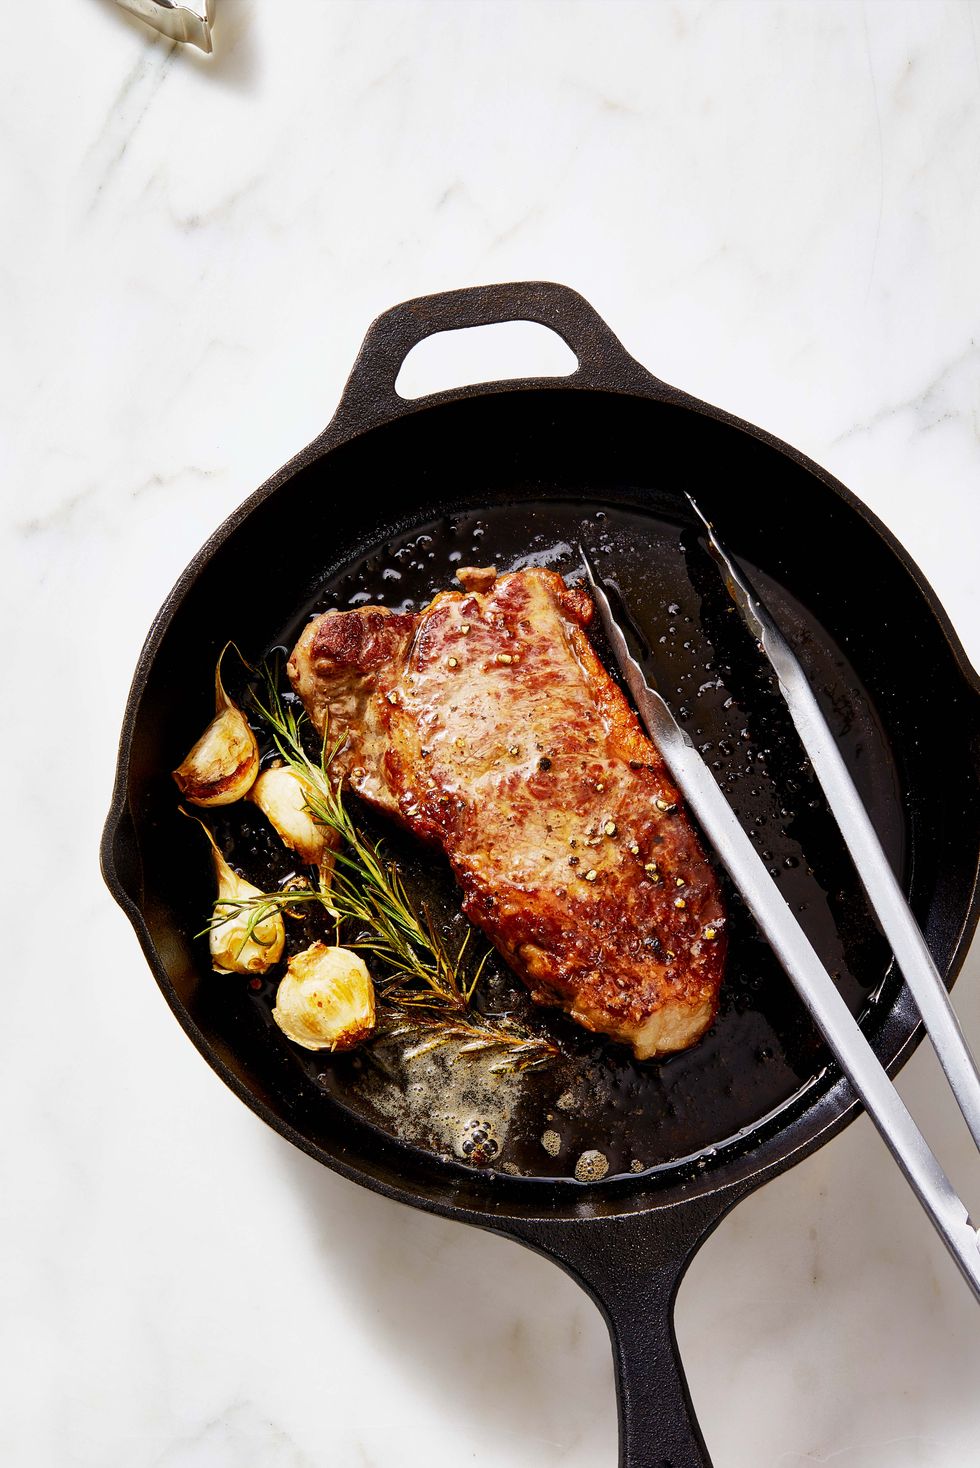 new york strip steak with rosemary and garlic on a cast iron skillet